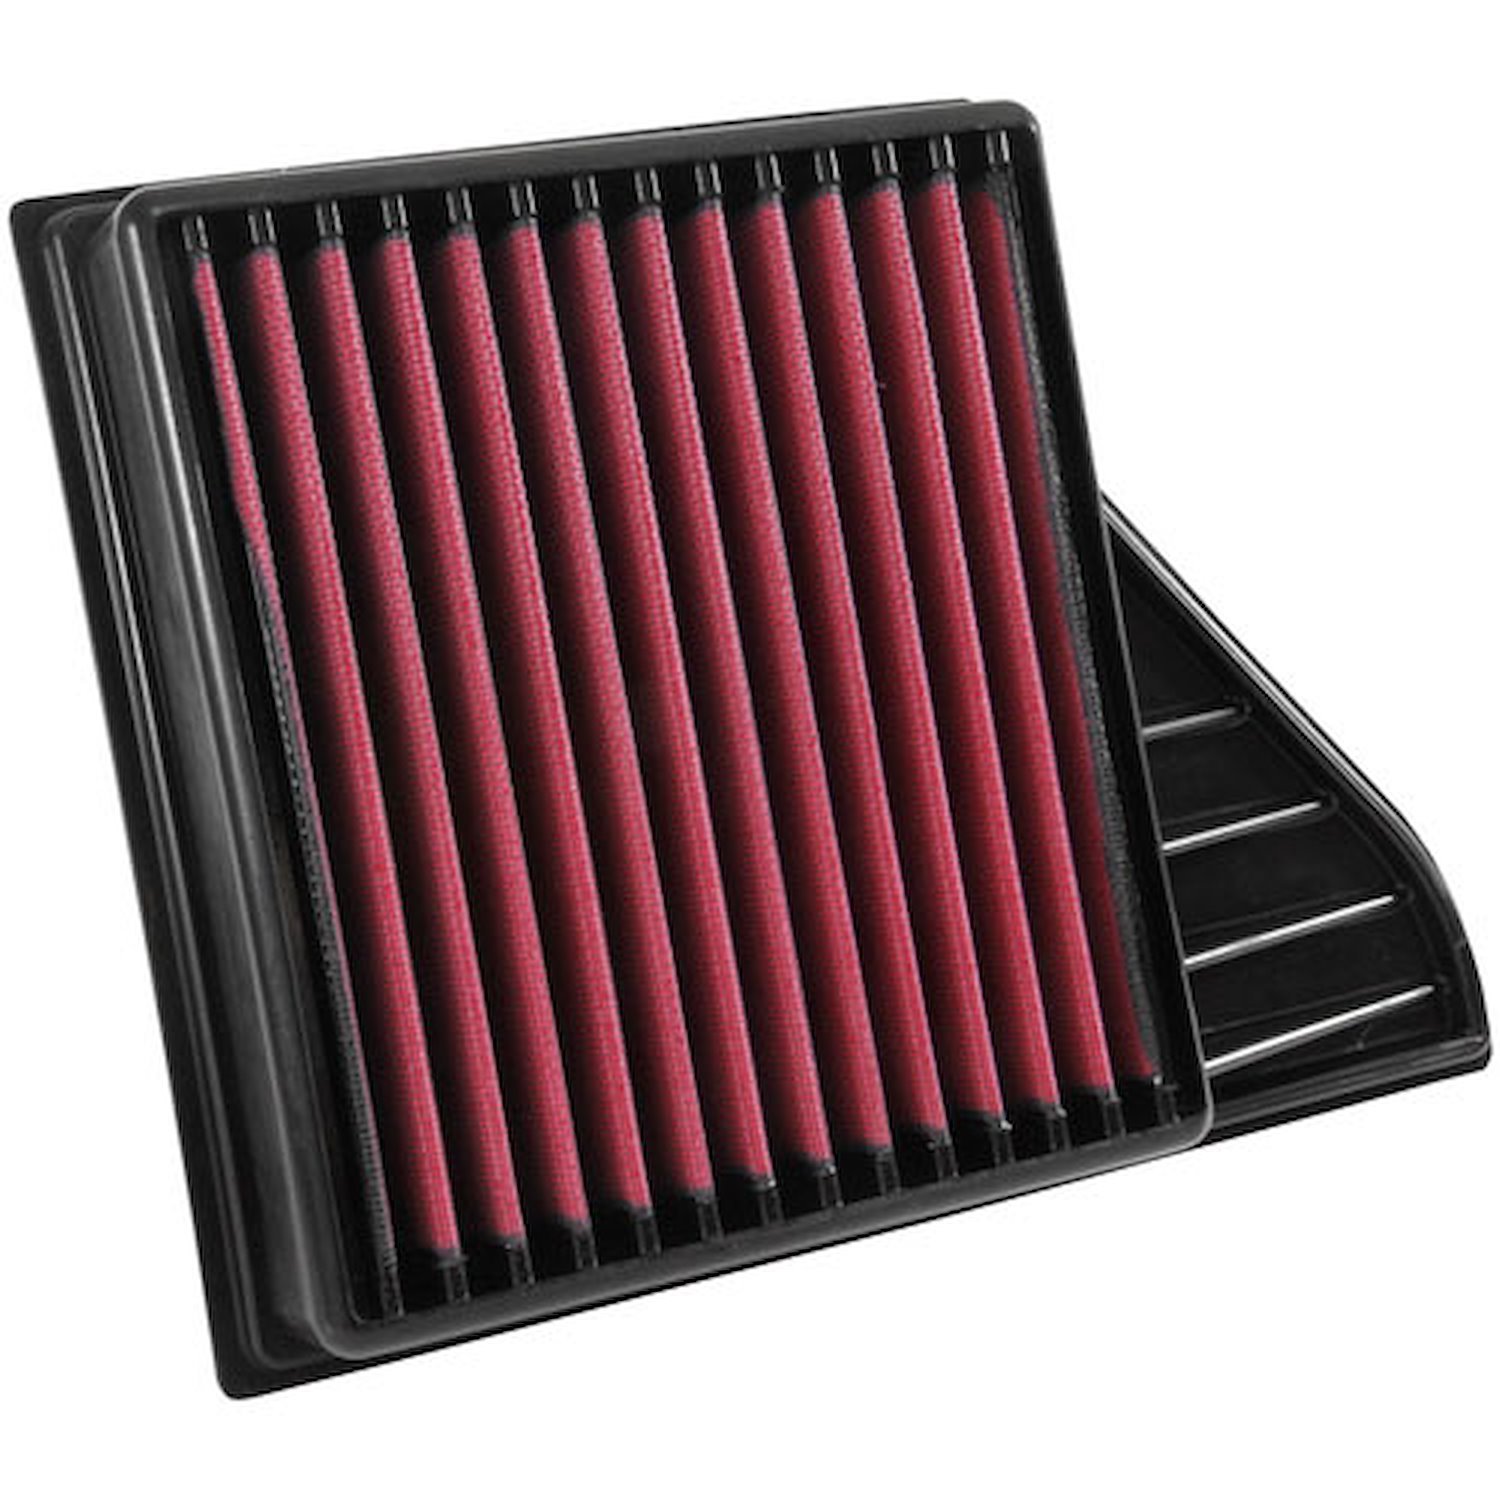 SynthaMax "Dry" OE Replacement Filter 2010 Ford Mustang 4.6L